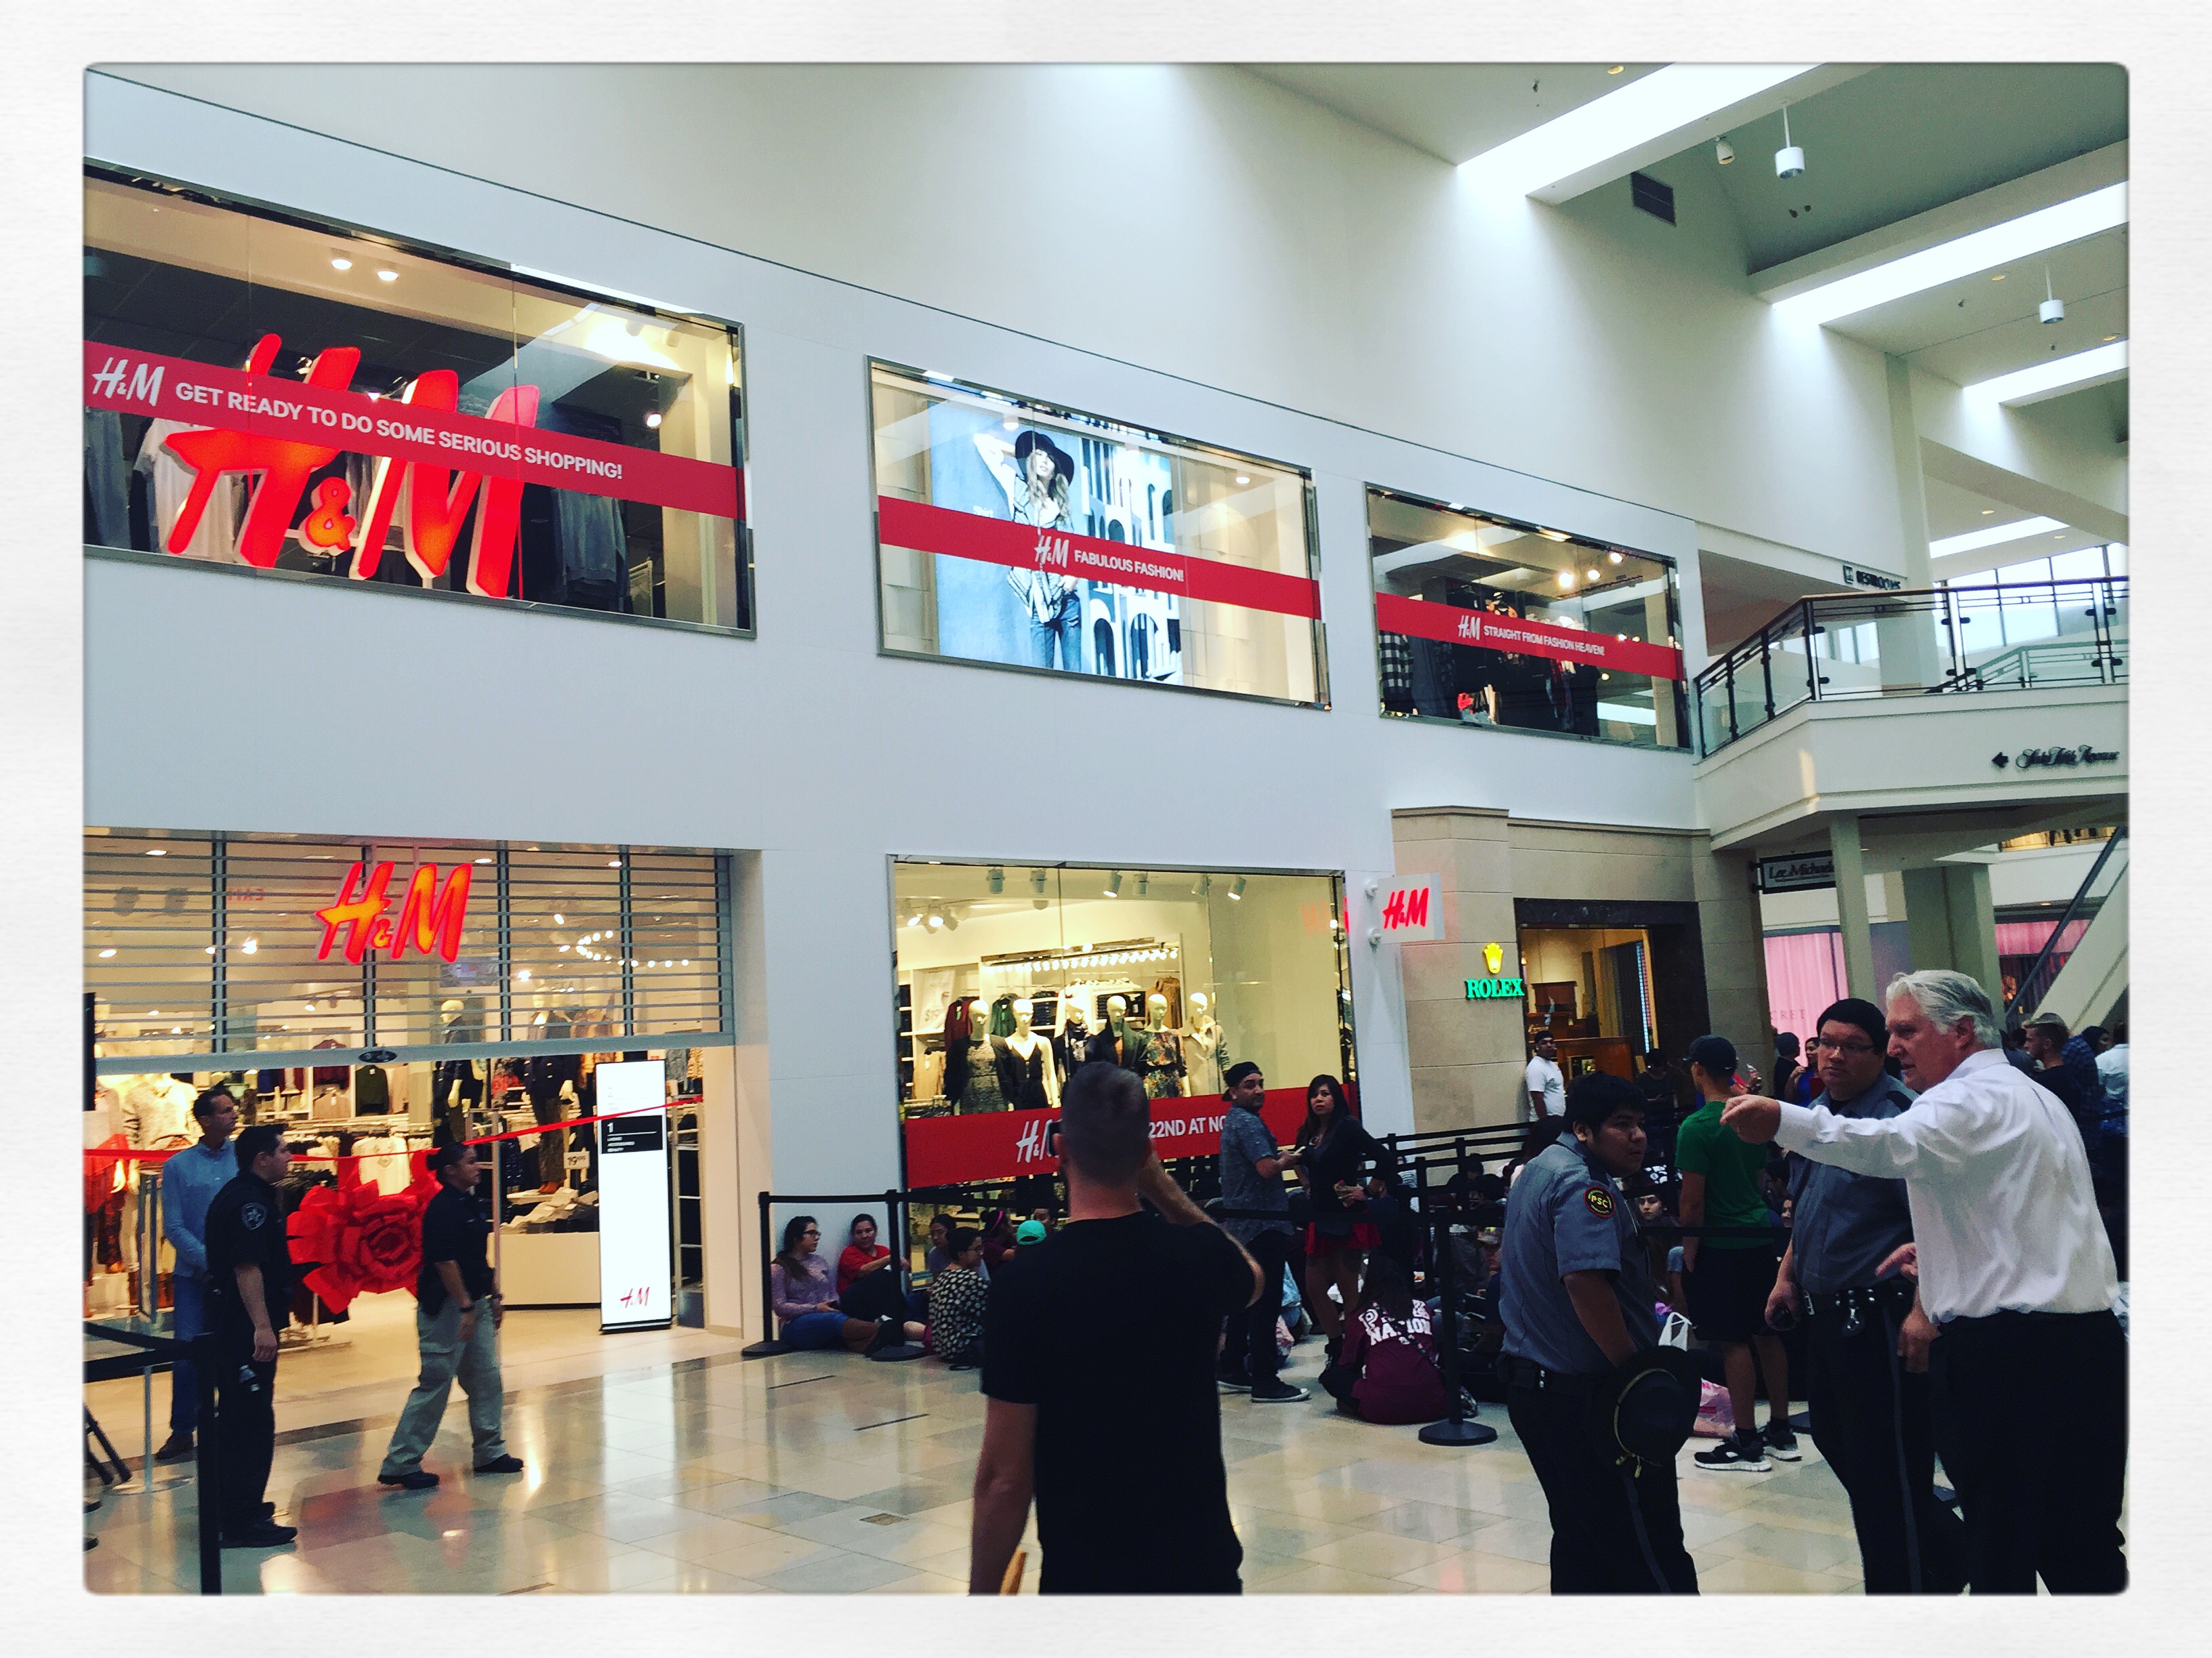 North Star Mall is one of the best places to shop in San Antonio